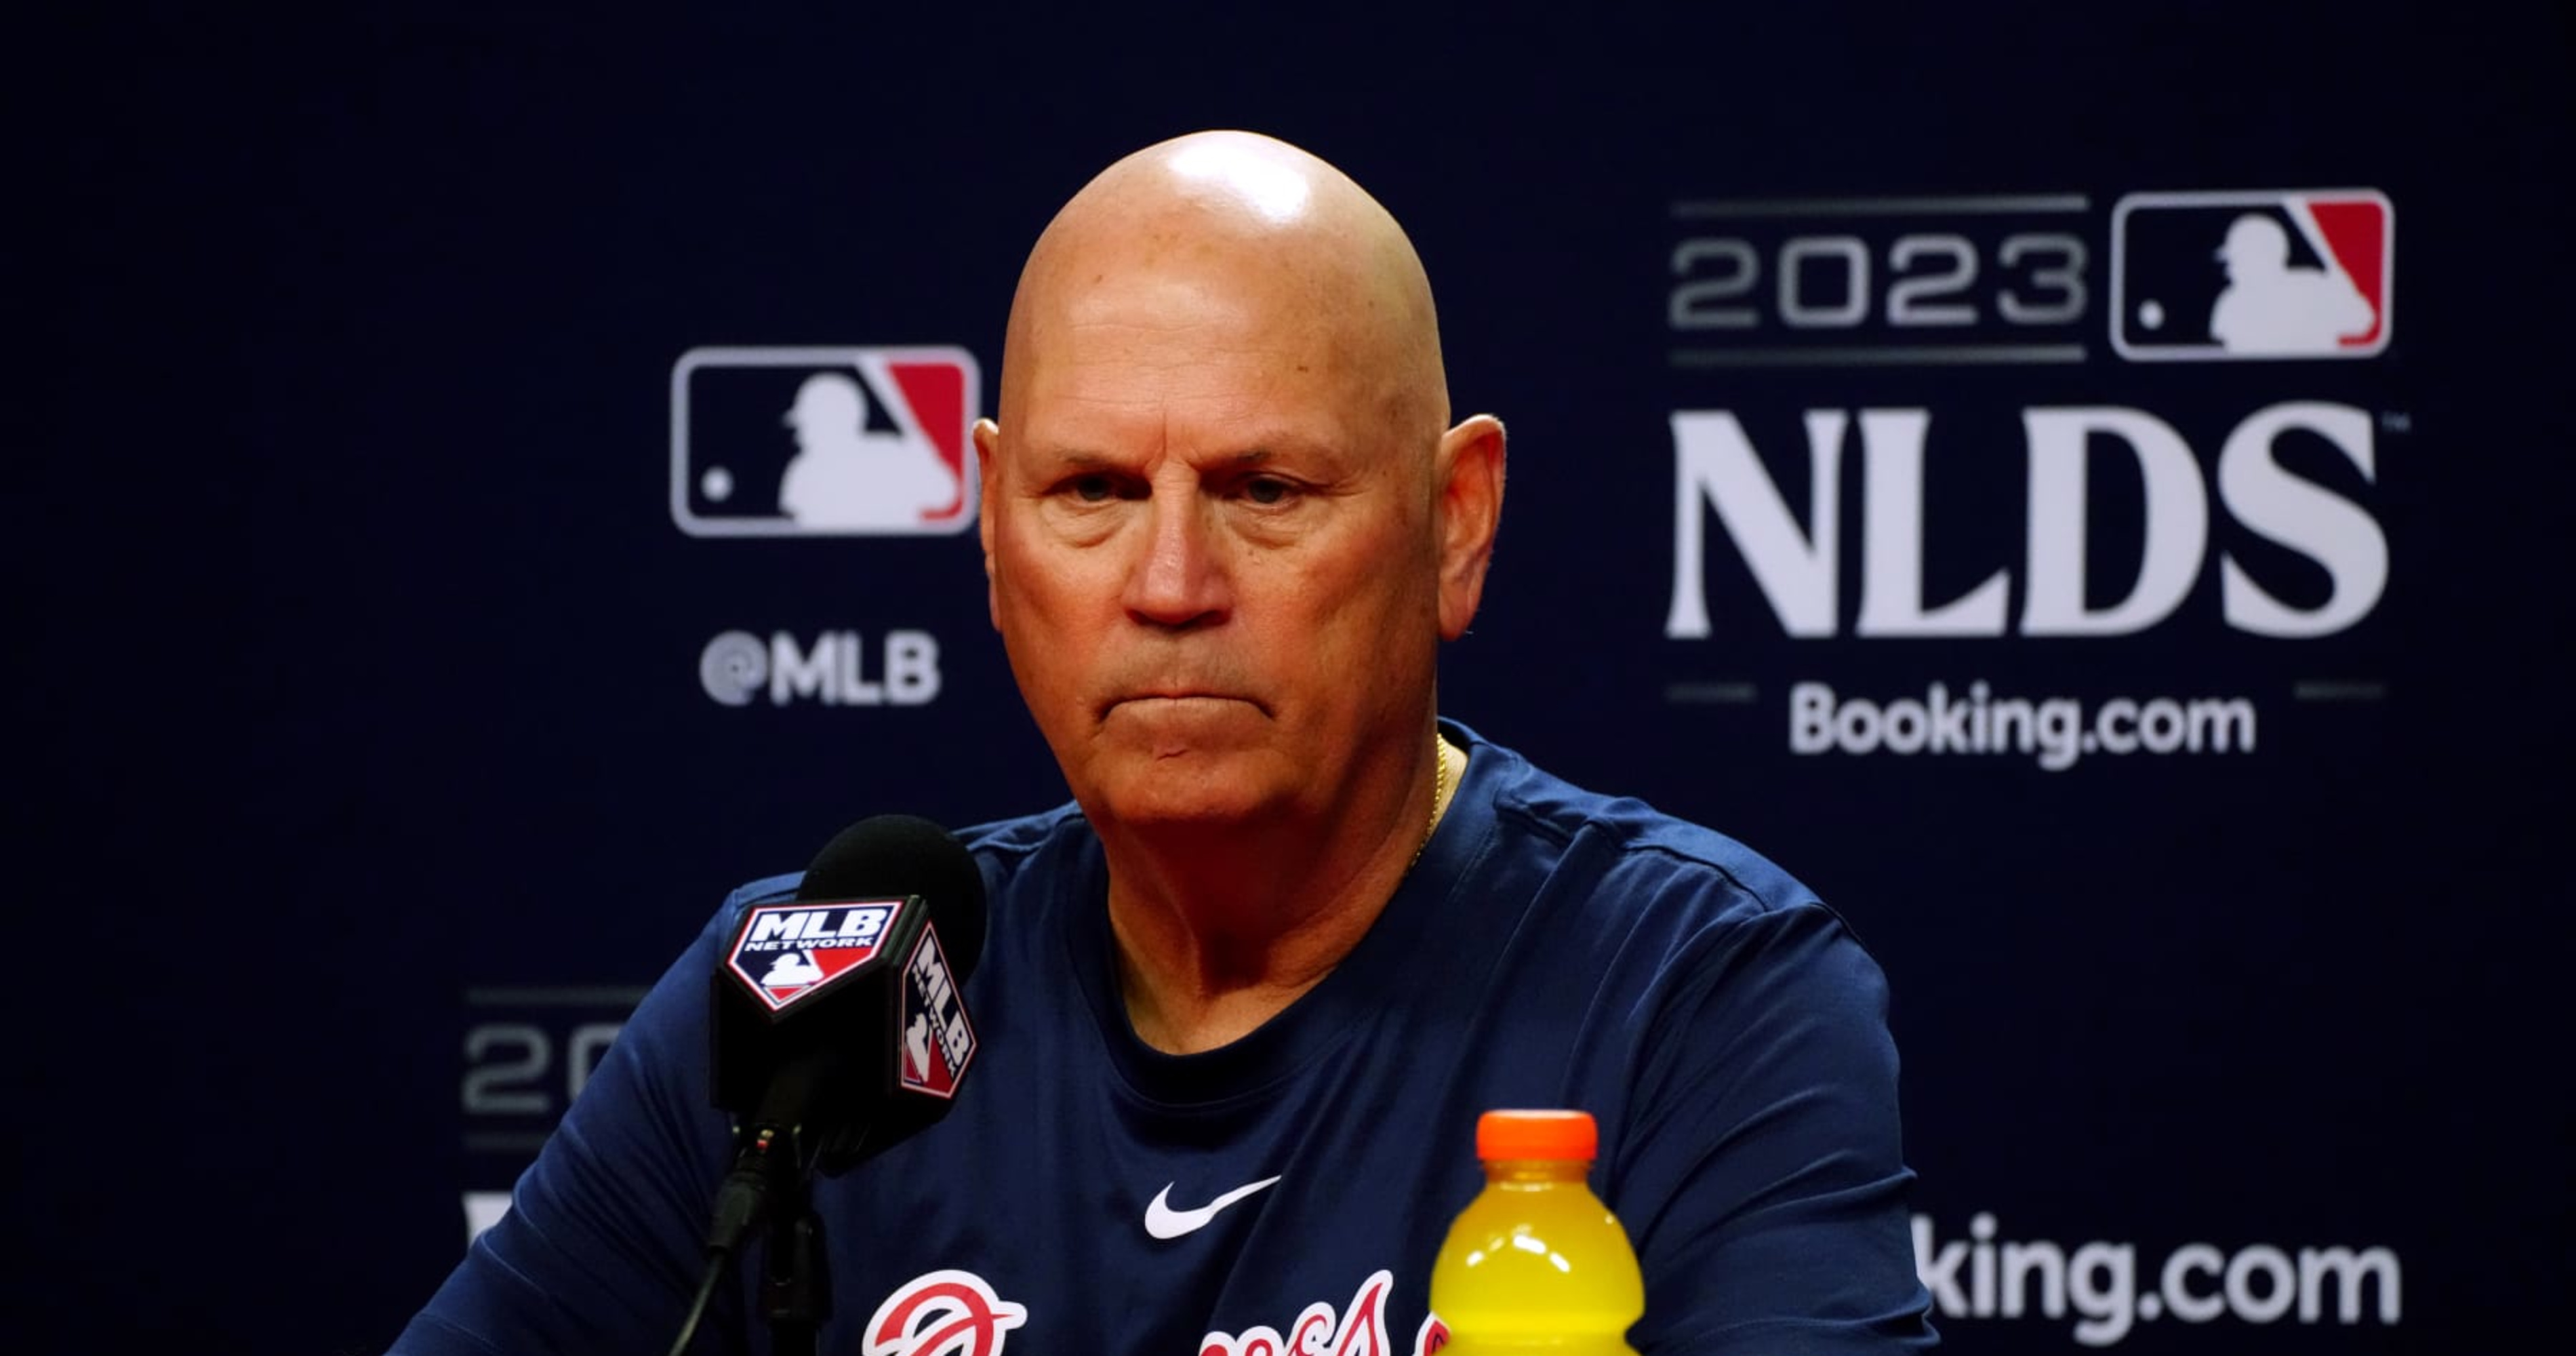 Braves Manager's Family to Skip Philly Games Amid Hostility